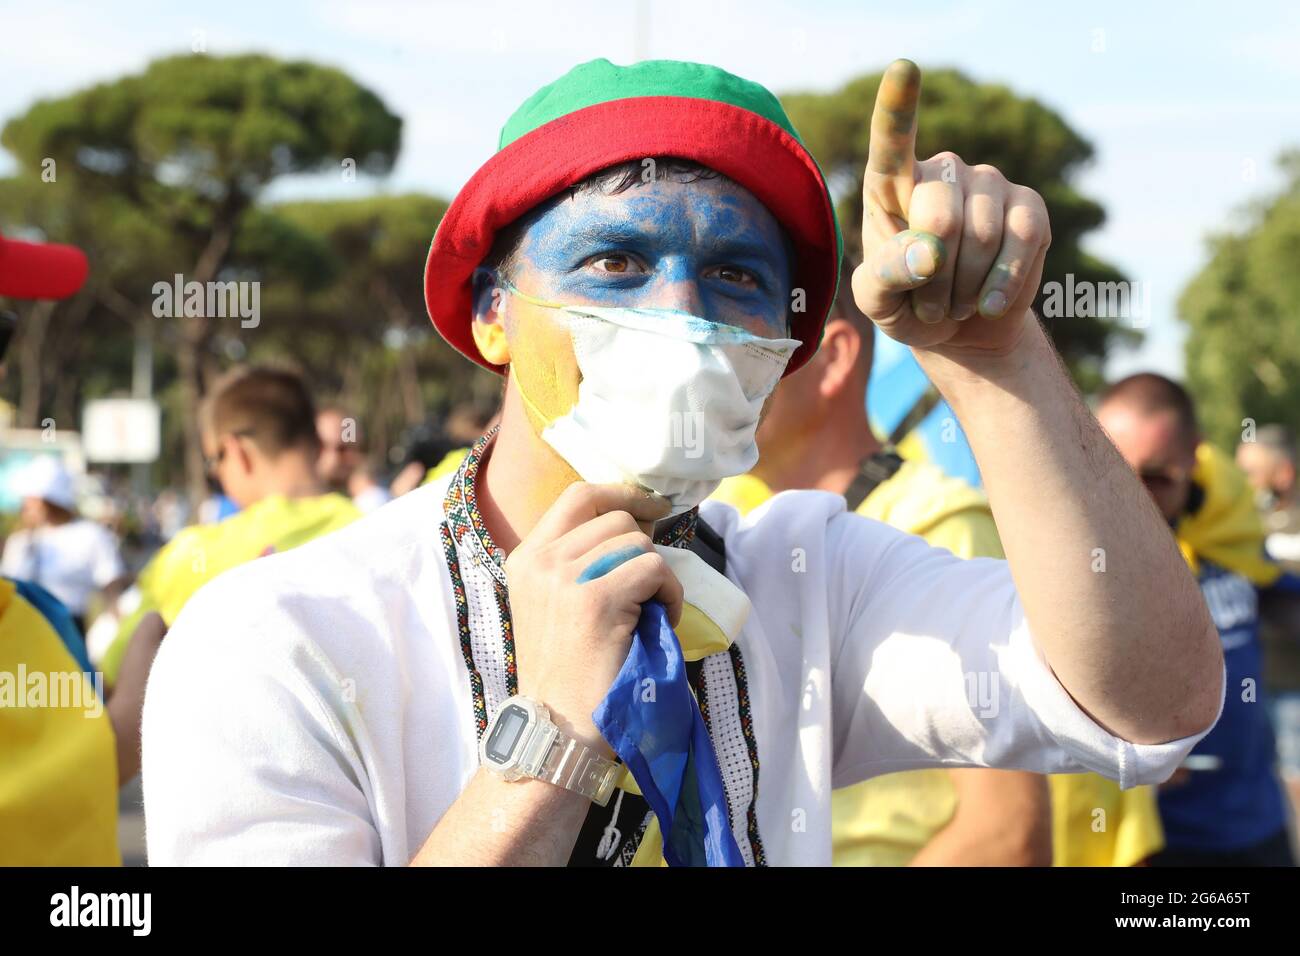 Rome, Italy, 3rd July 2021. A Ukraine fan with his face painted makes friendly gestures towards England fans prior to the UEFA Euro 2020 Quarter Final match at the Stadio Olimpico, Rome. Picture credit should read: Jonathan Moscrop / Sportimage Stock Photo